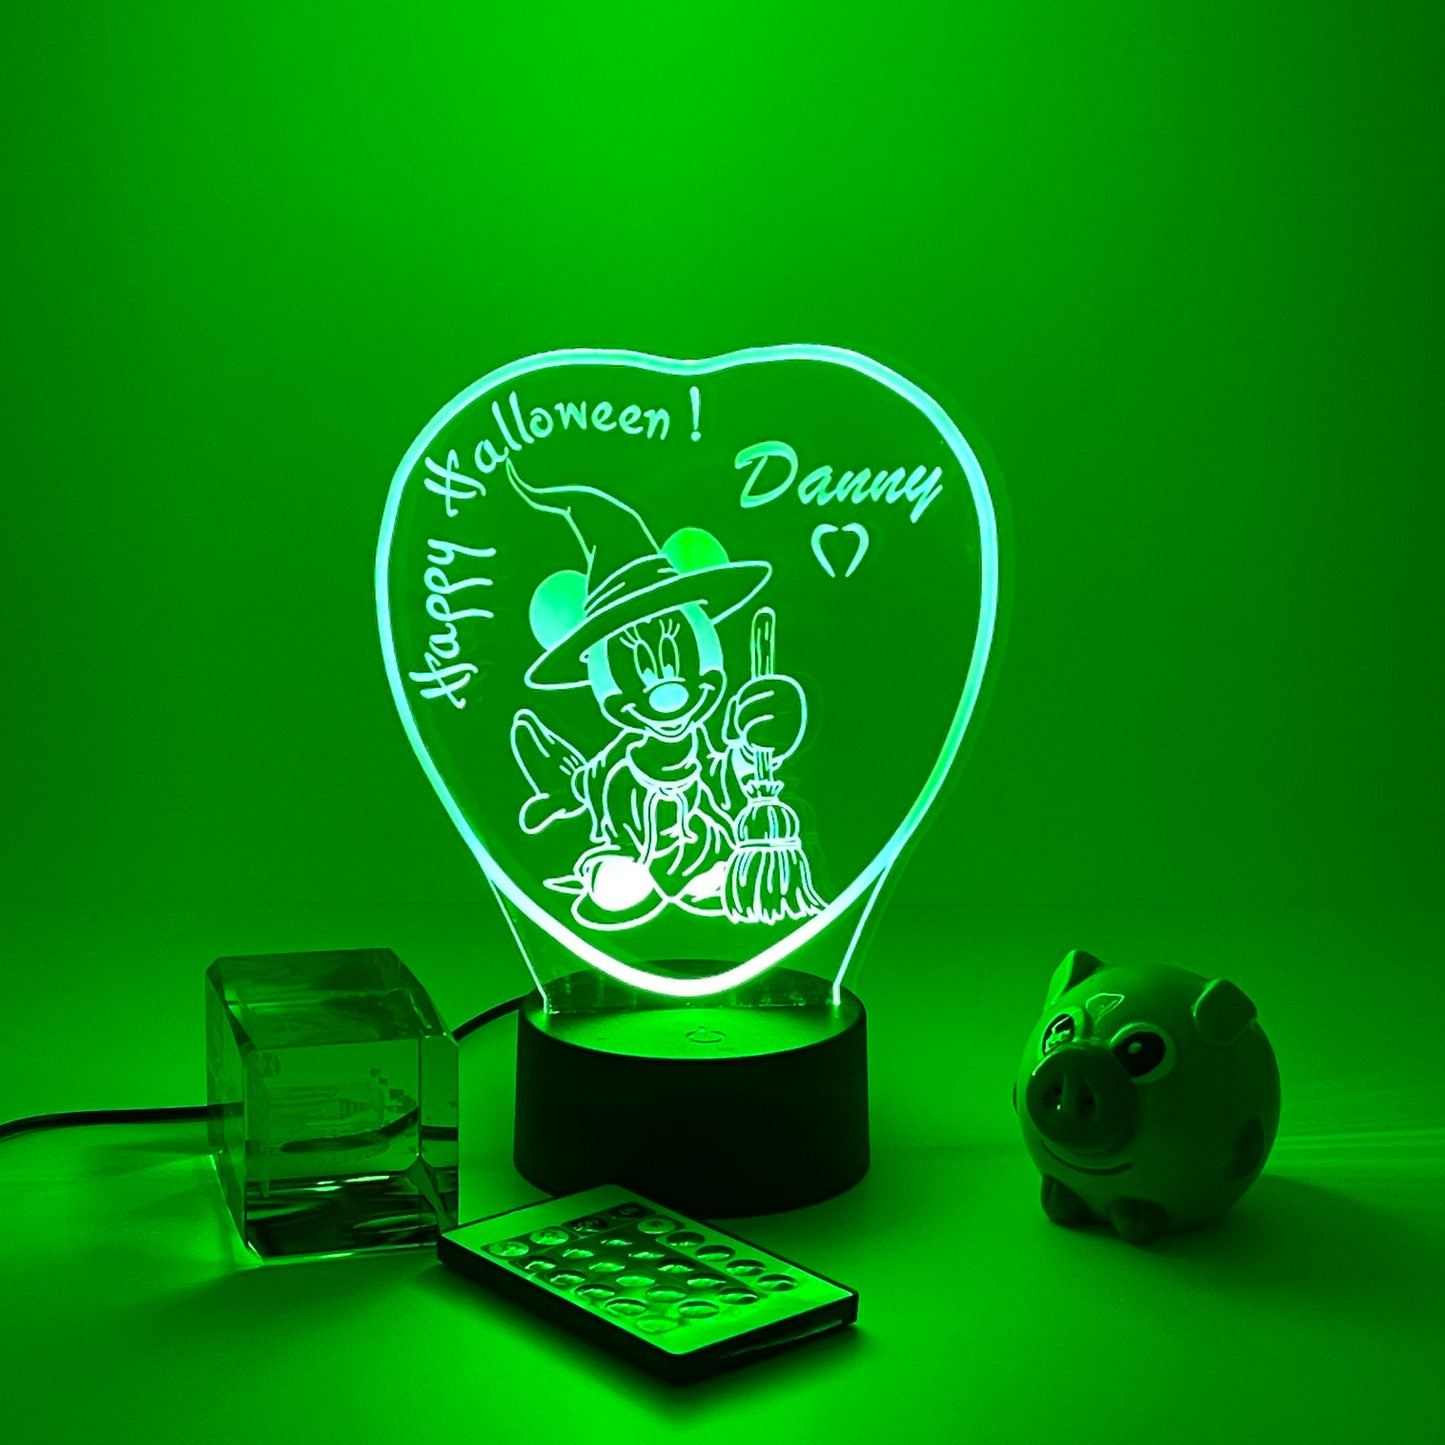 Personalized Halloween gifts Mickey mouse 3D night light